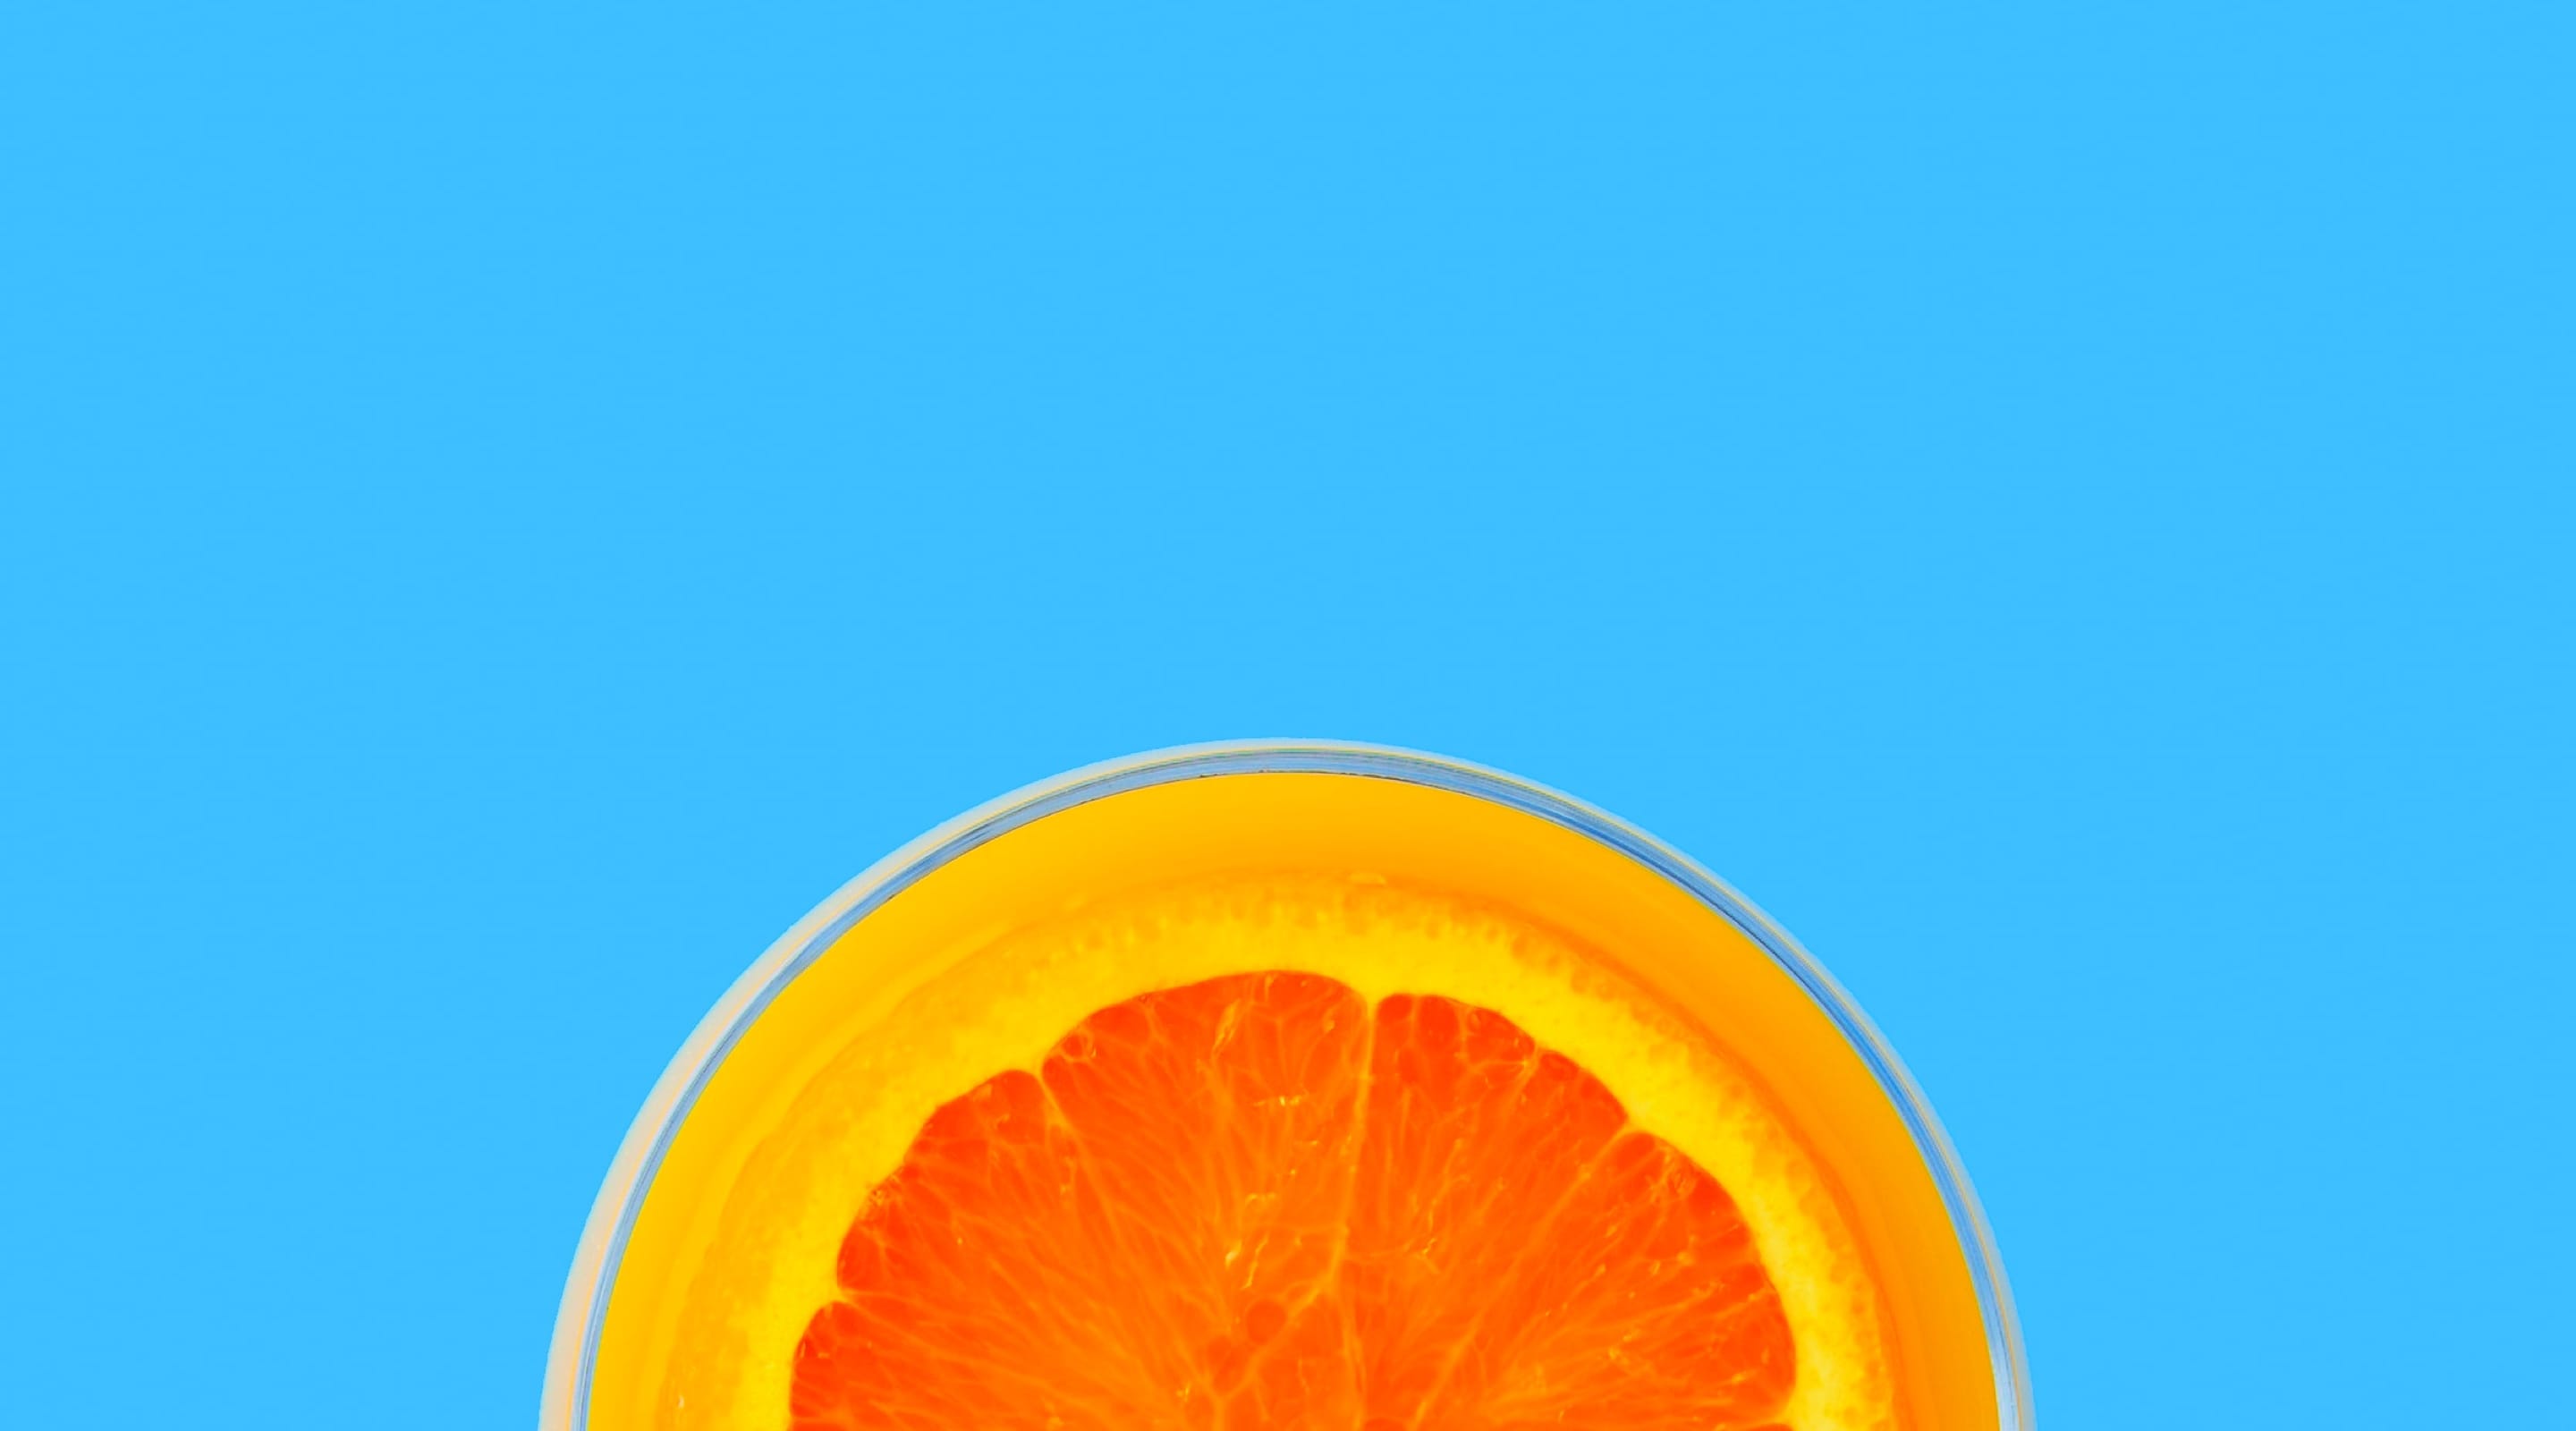 Half slice of an orange against a cyan-colored background